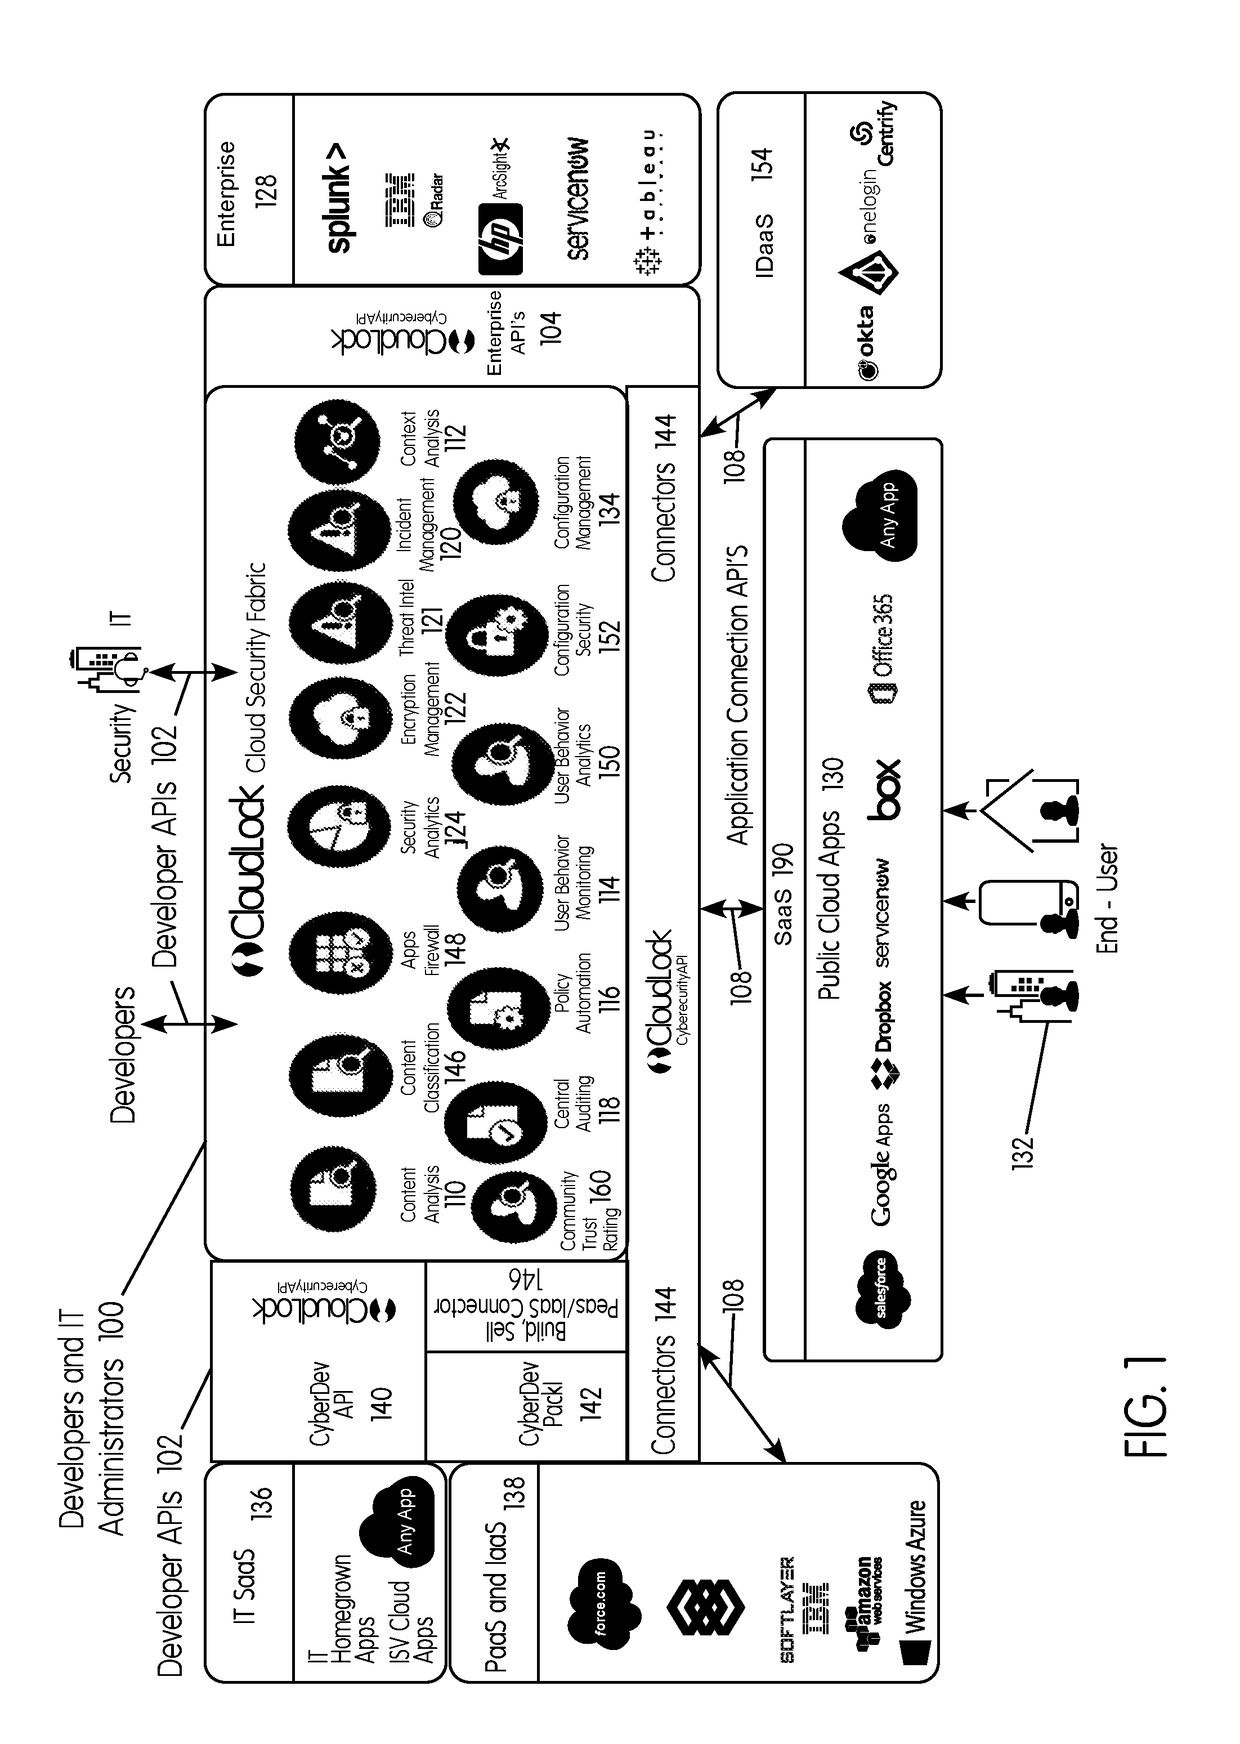 System and method for securing an enterprise computing environment